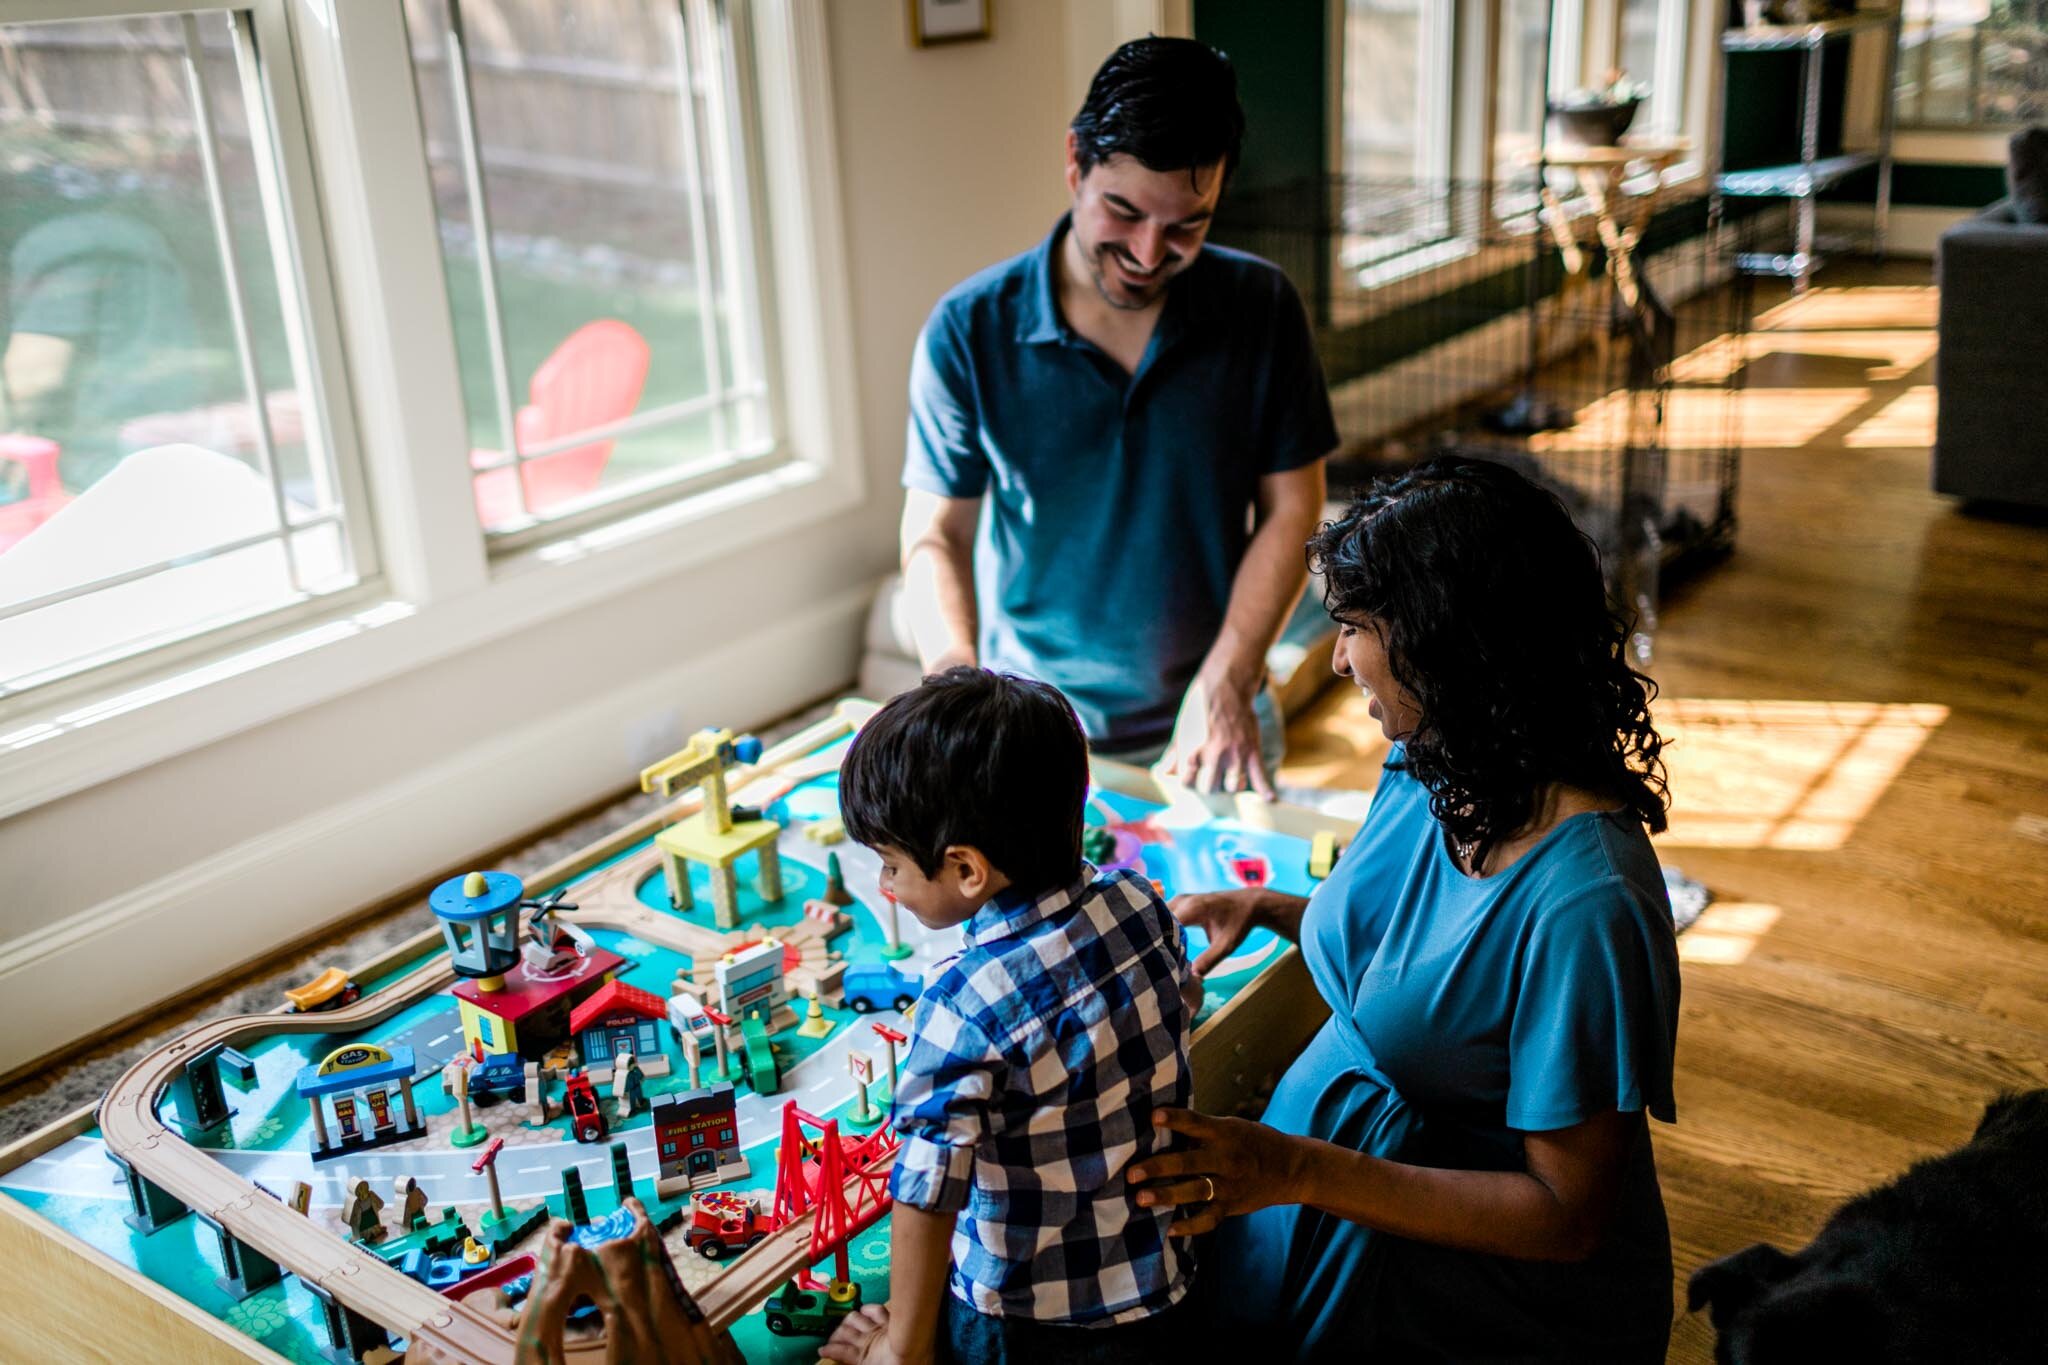 Durham Photographer | By G. Lin Photography | Family playing with train set indoors